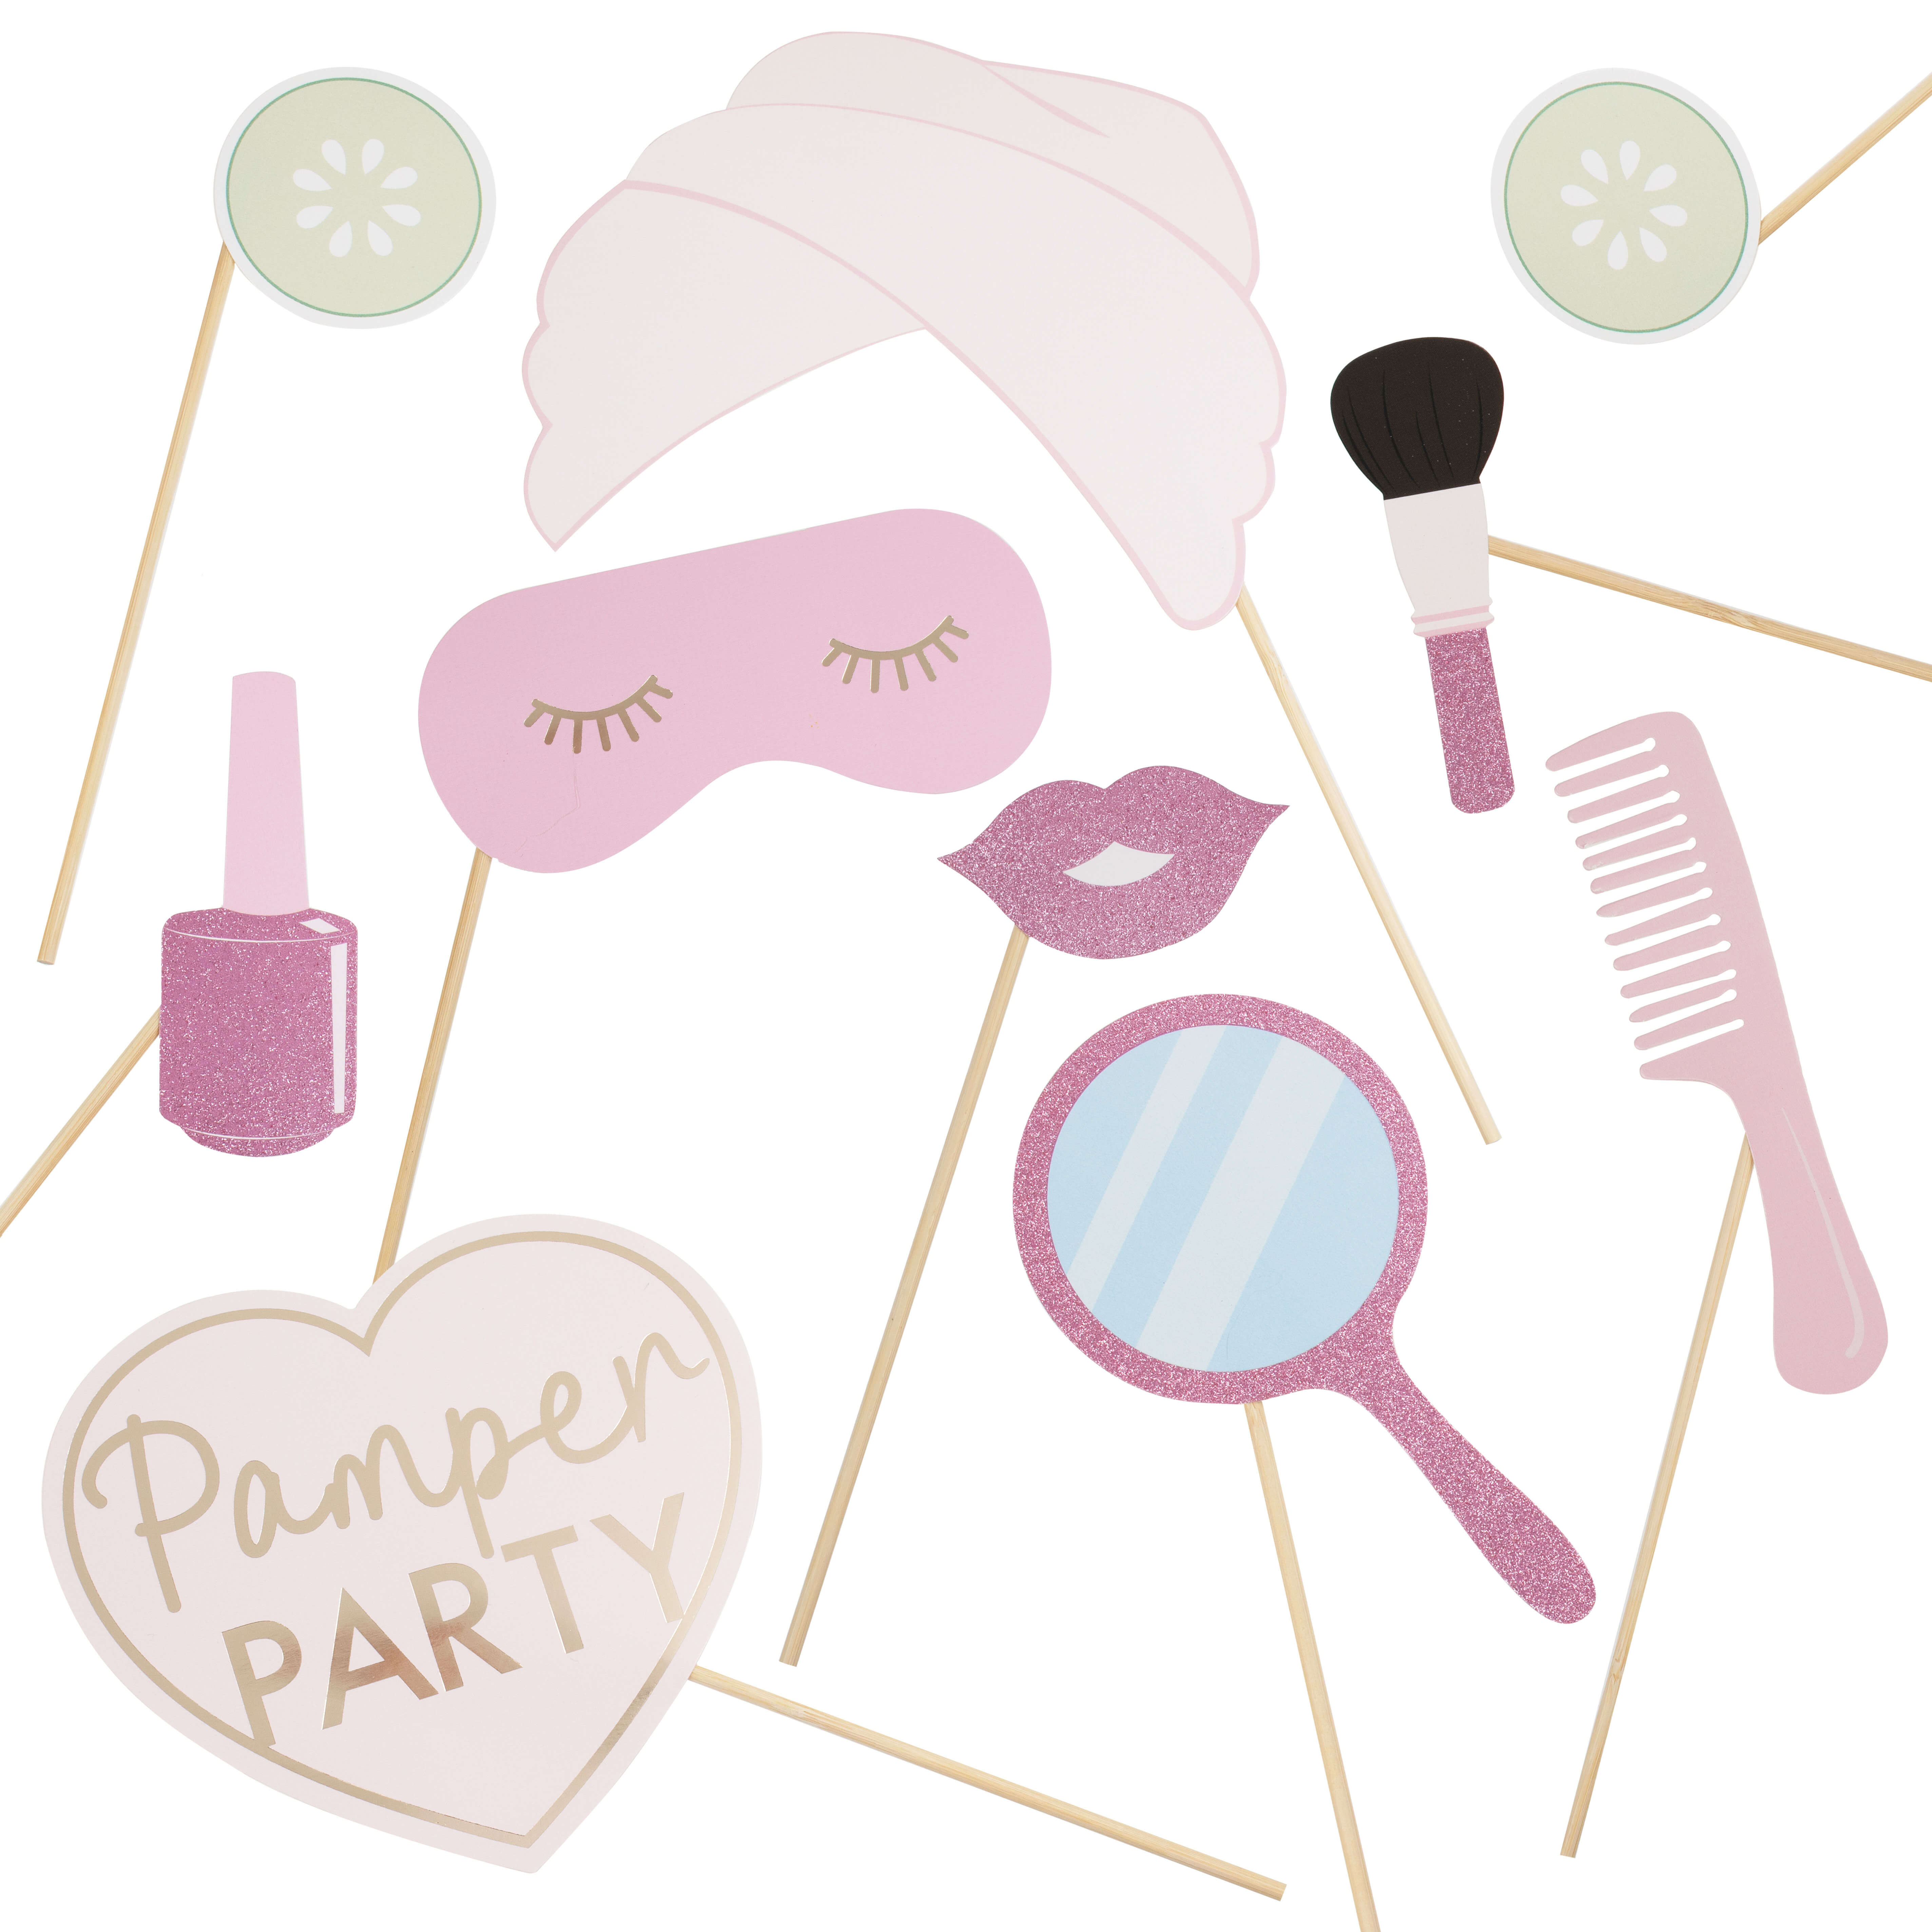 Photobooth Props Pamper Party, 10-teilig